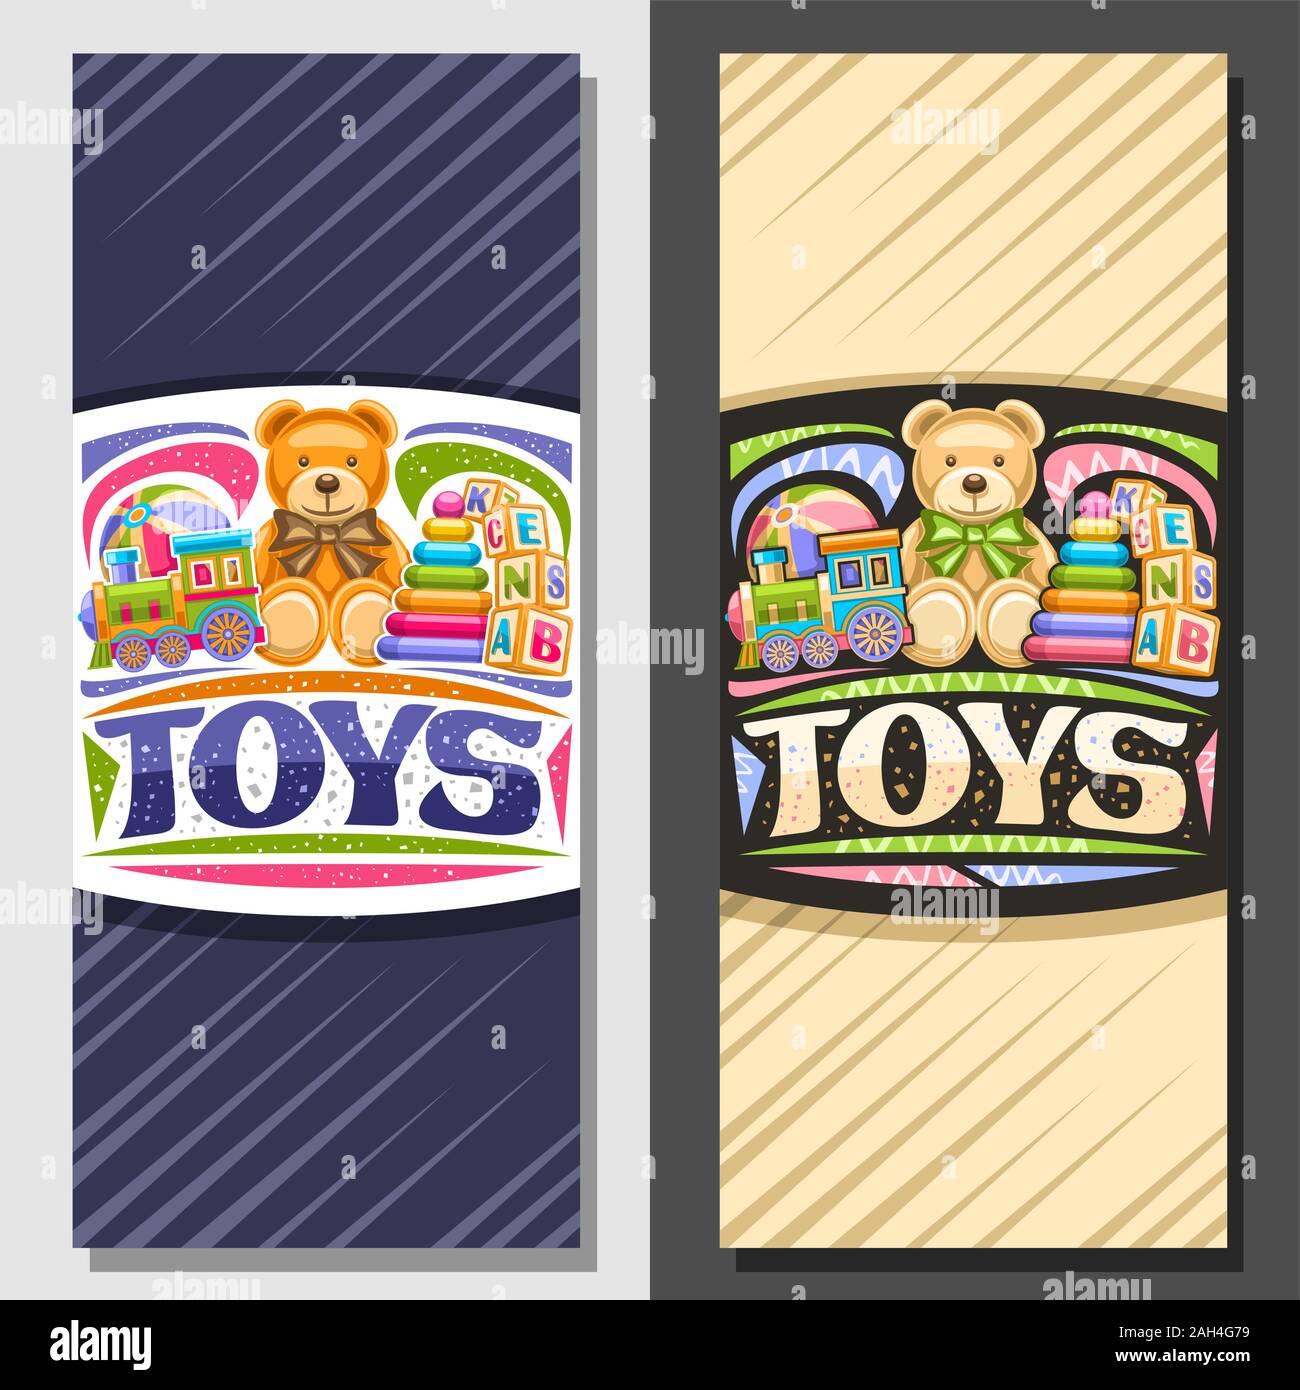 Vector layouts for Kids Toys, decorative leaflets with illustration of steam train, inflatable ball, plush teddy bear, plastic pyramid and wooden kids Stock Vector